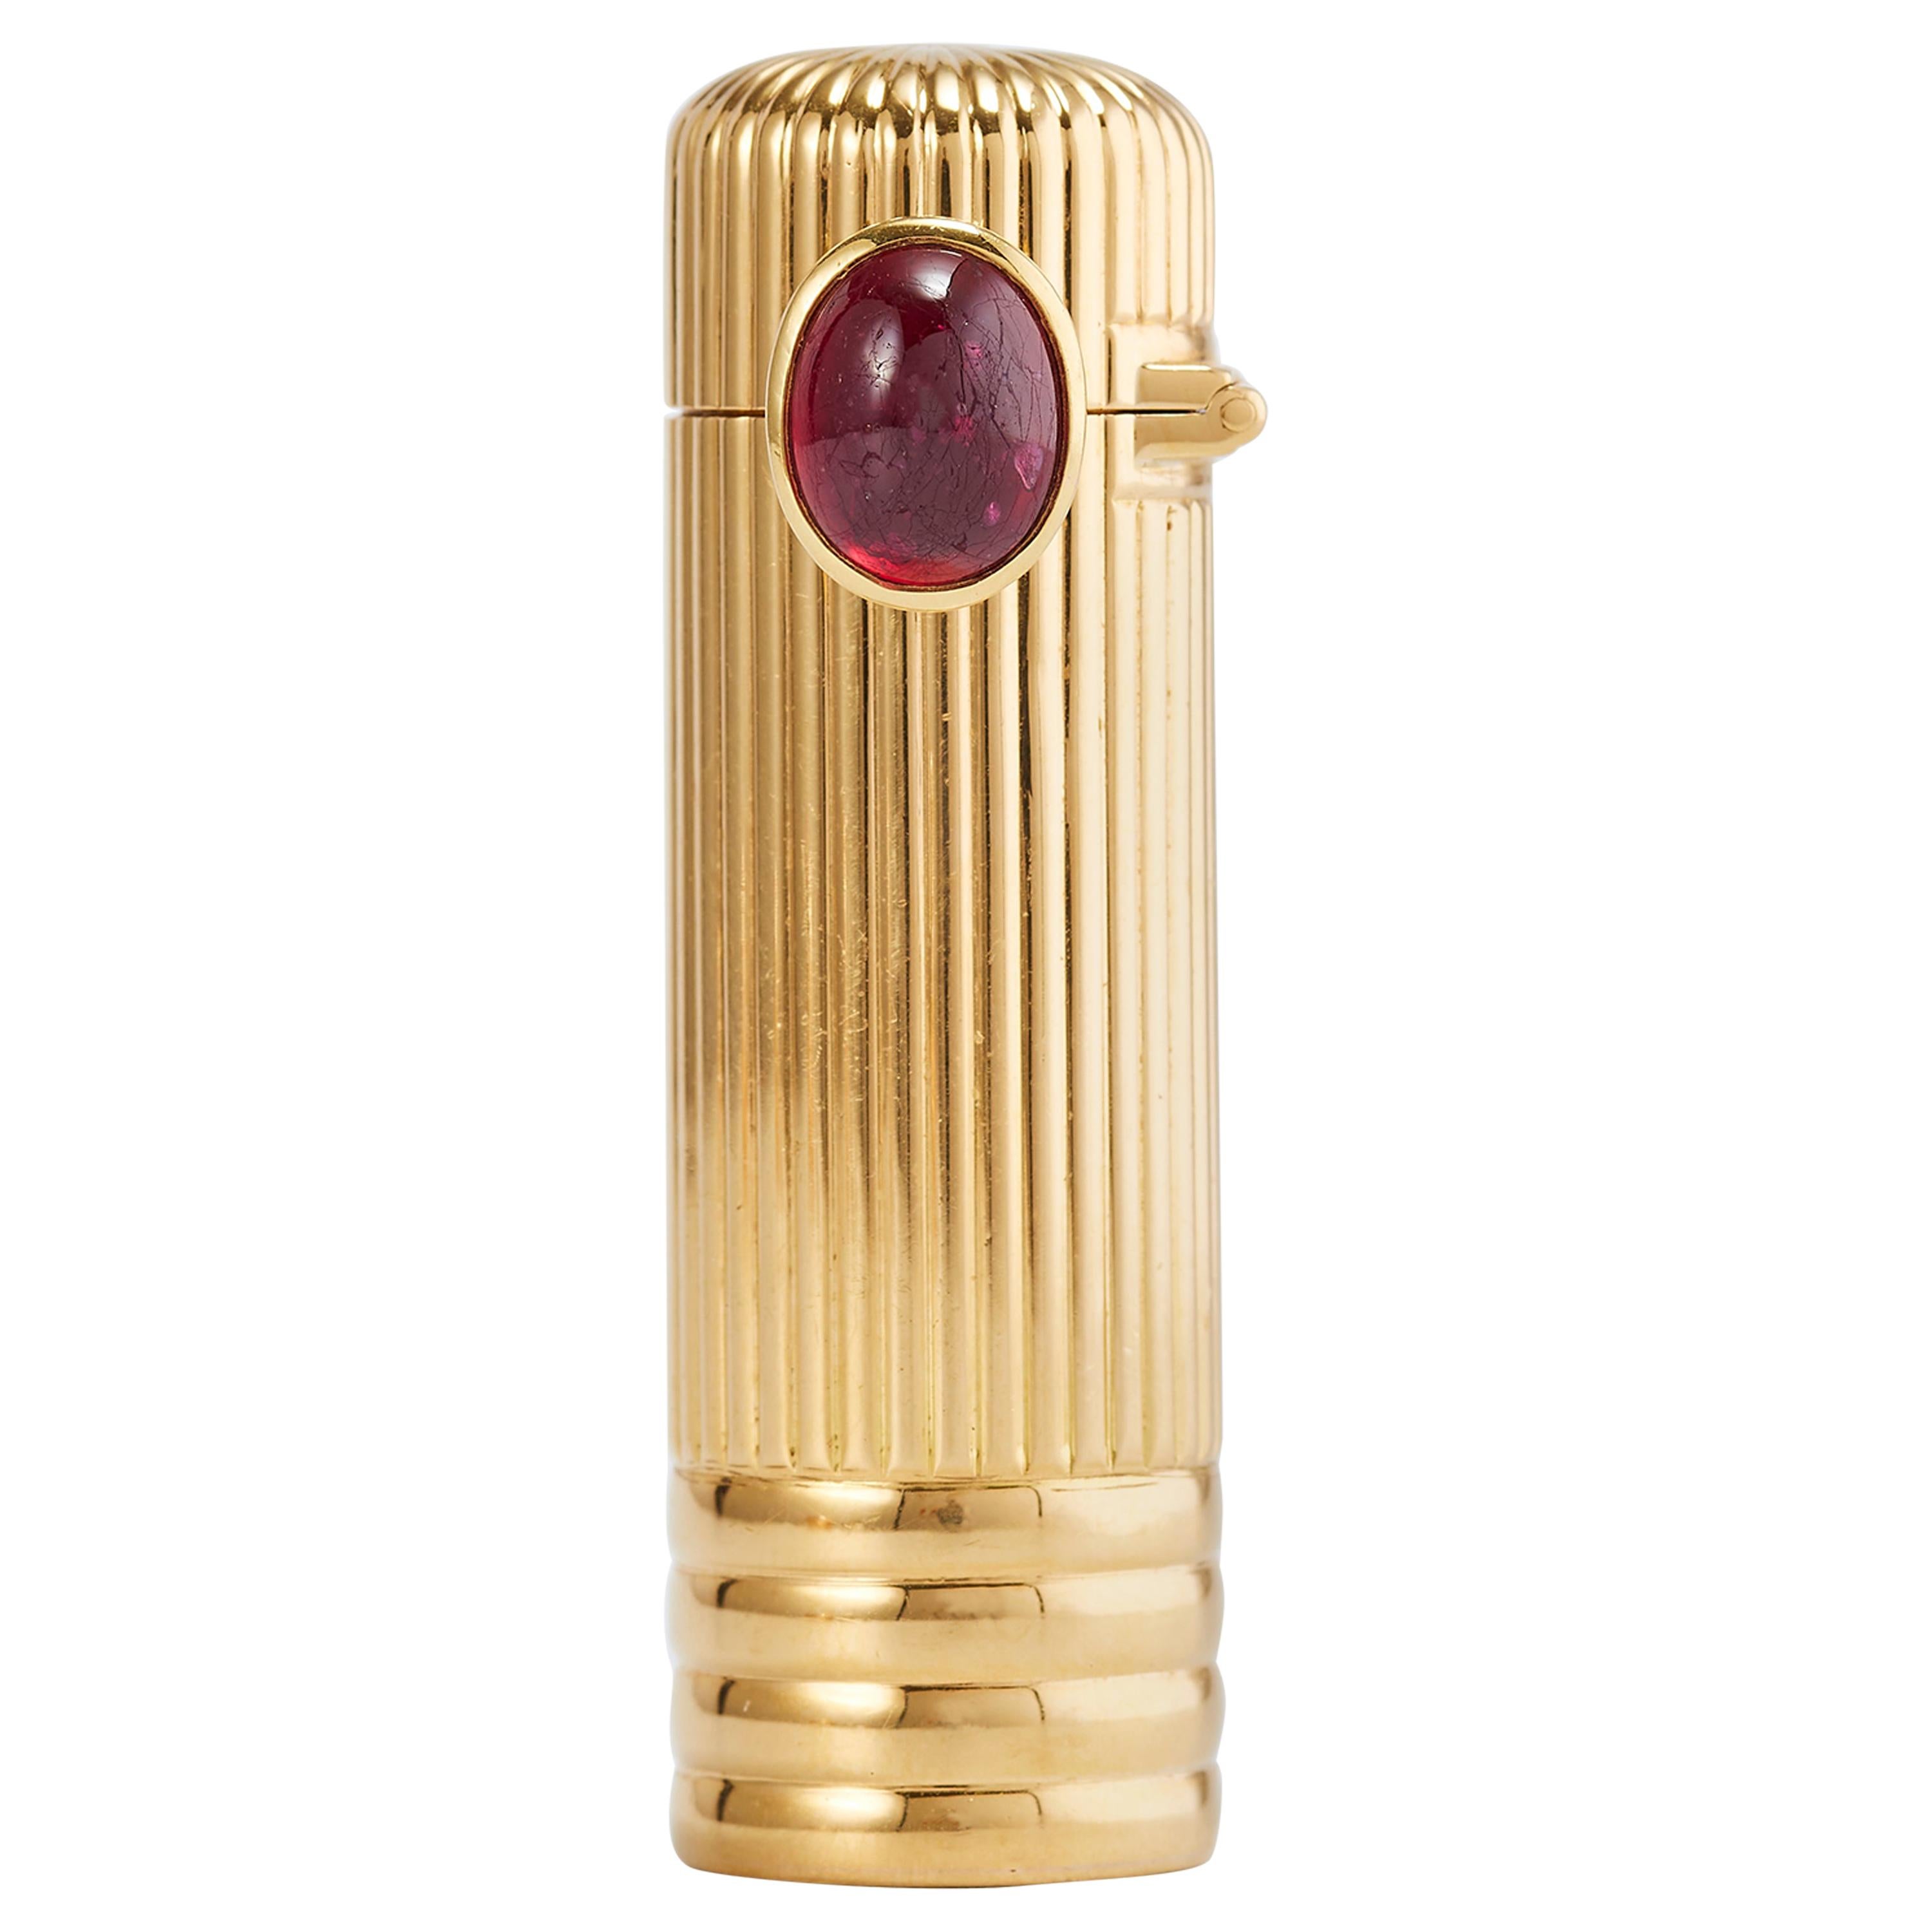 Cartier 18 Karat Yellow Gold Lipstick Container with Ruby